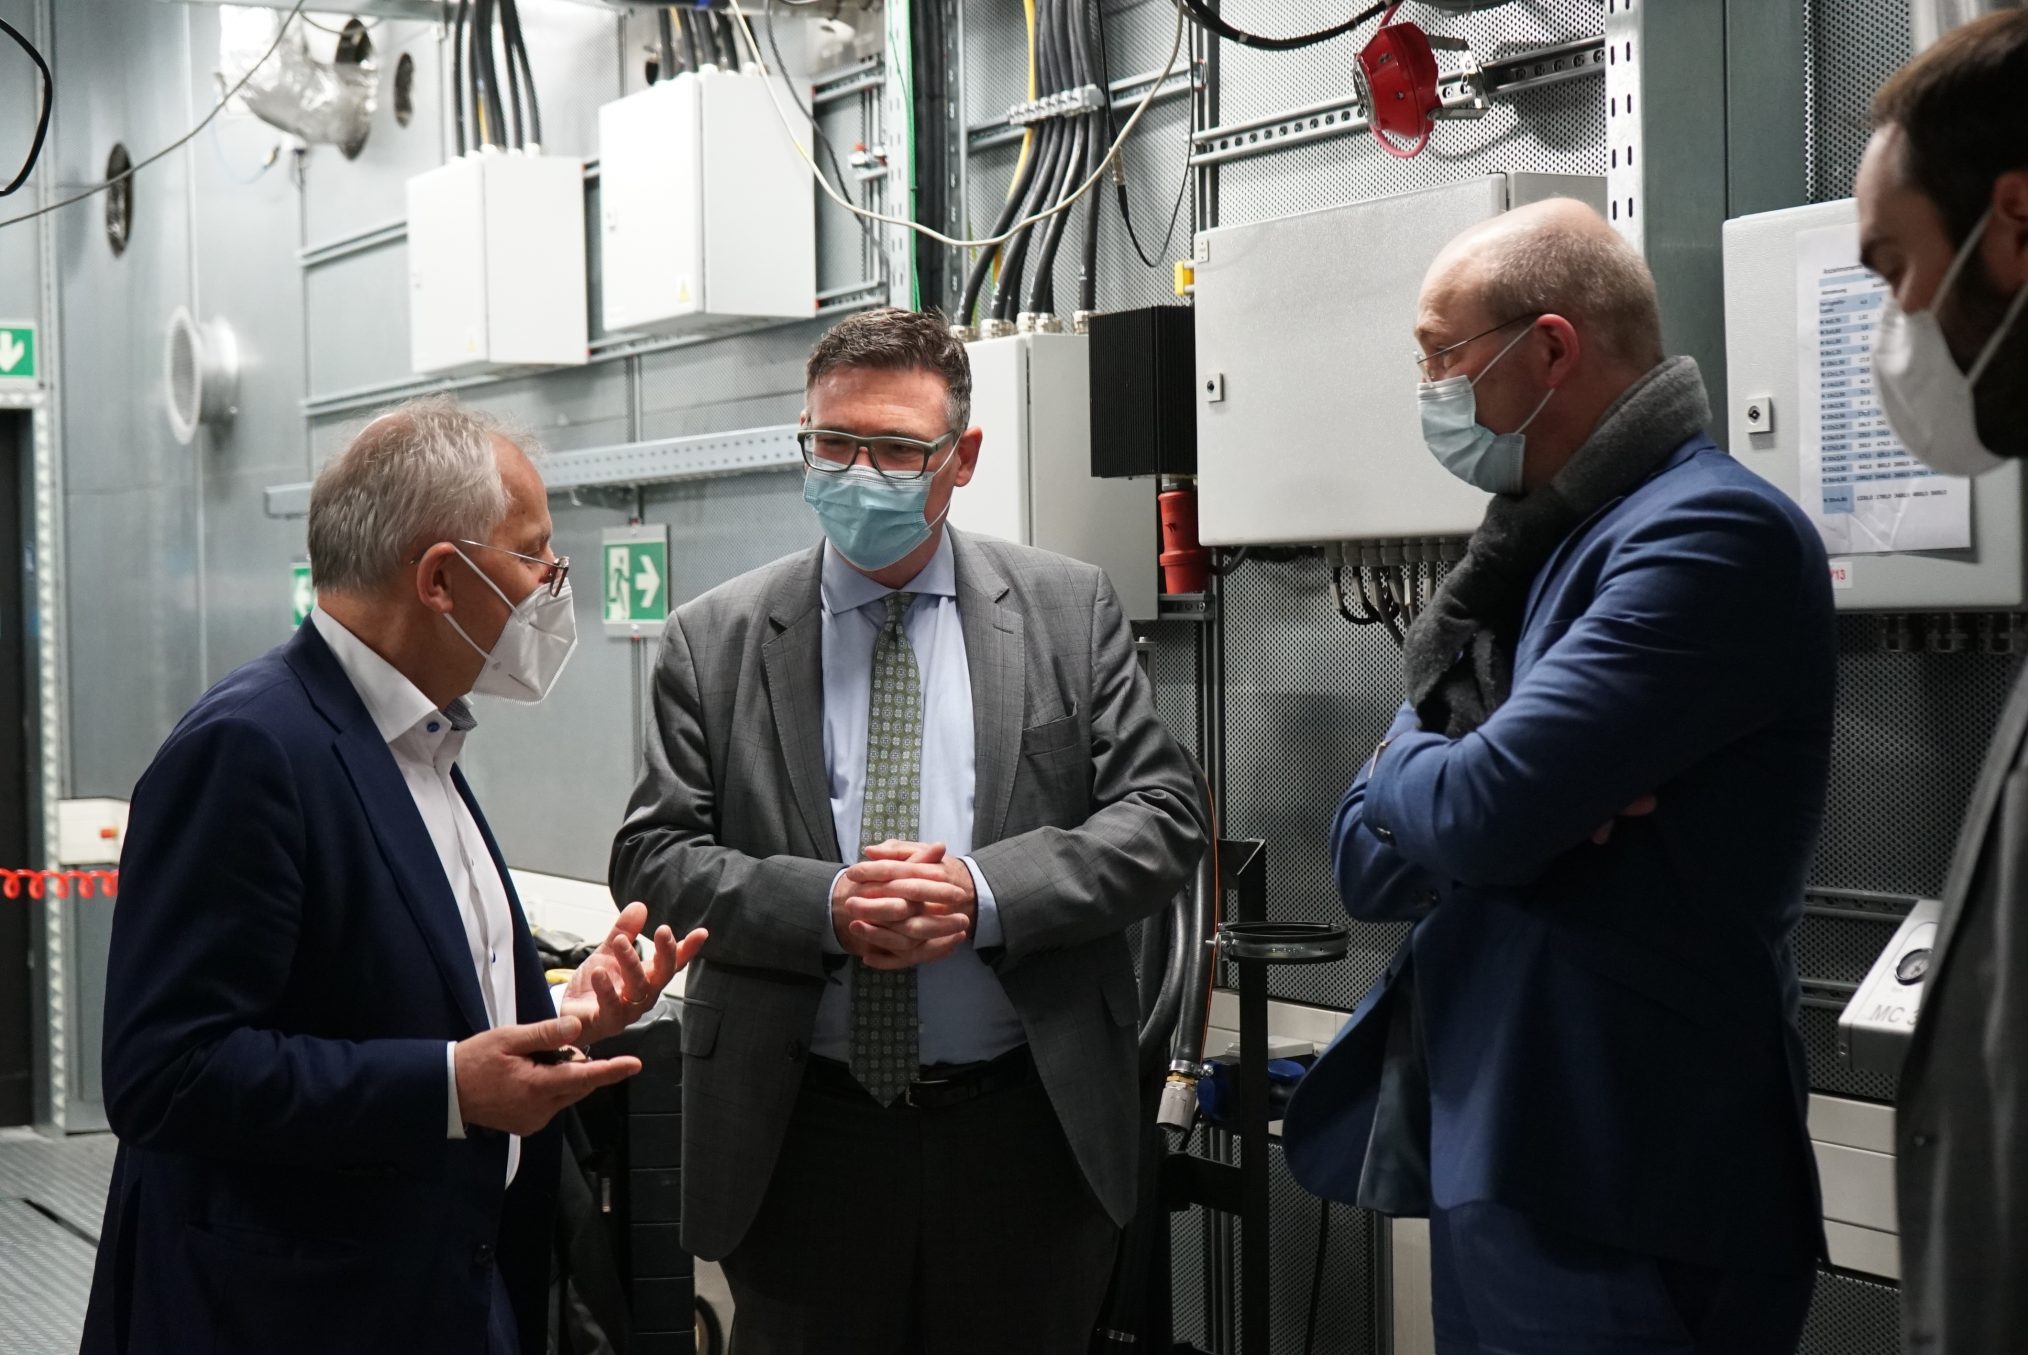 Visit of Dr. Kaufmann (Hydrogen Commissioner of the Federal Government at the BMBF) at RWTH Aachen University, Aachen